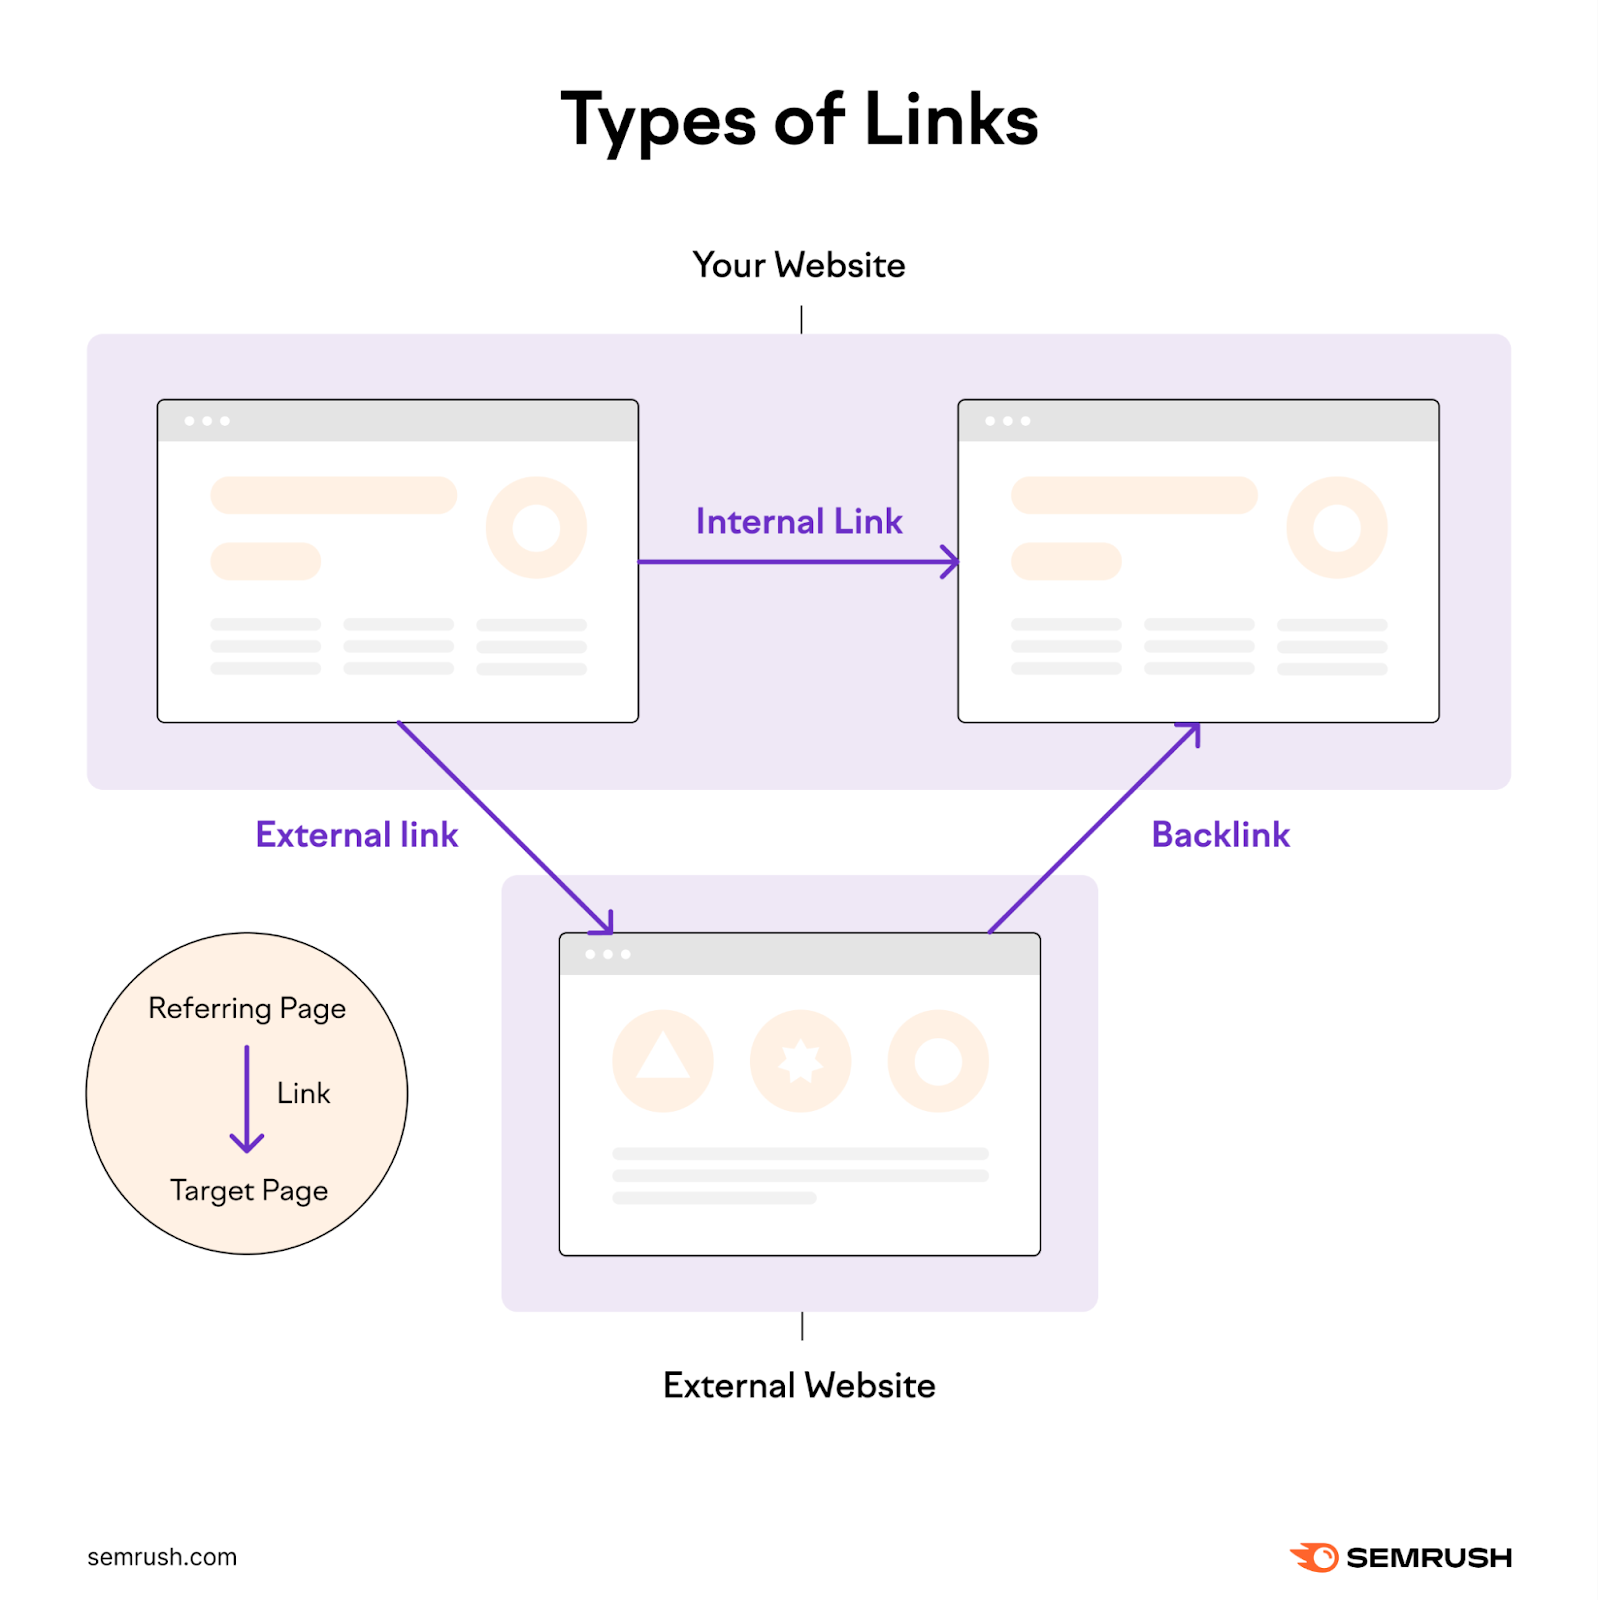 Types of links infographic, showing backlink, internal, and external links